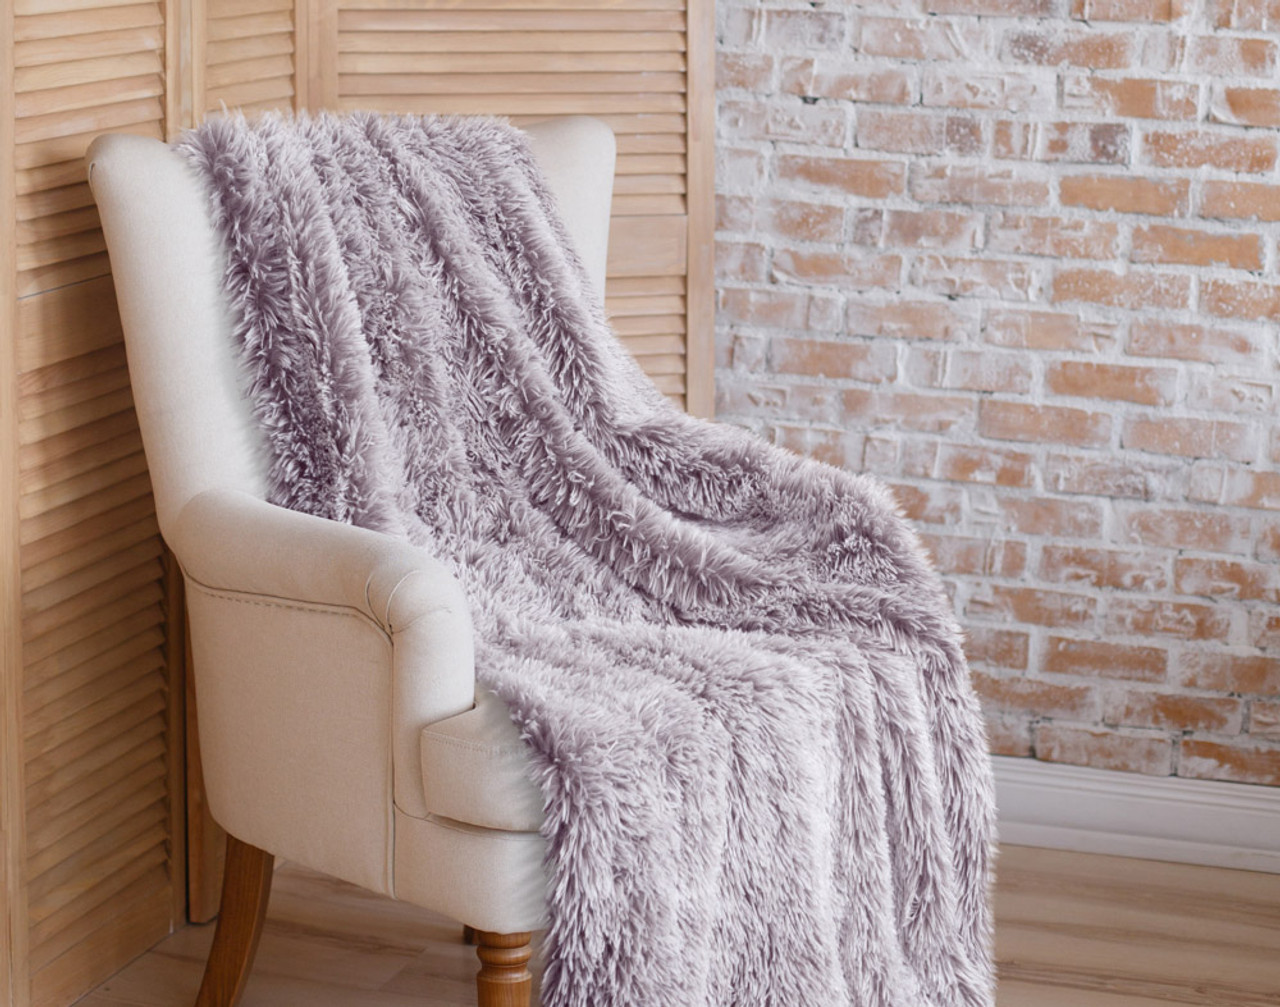 Our Frosted Shaggy Throw in Plum Purple draped over a chair.